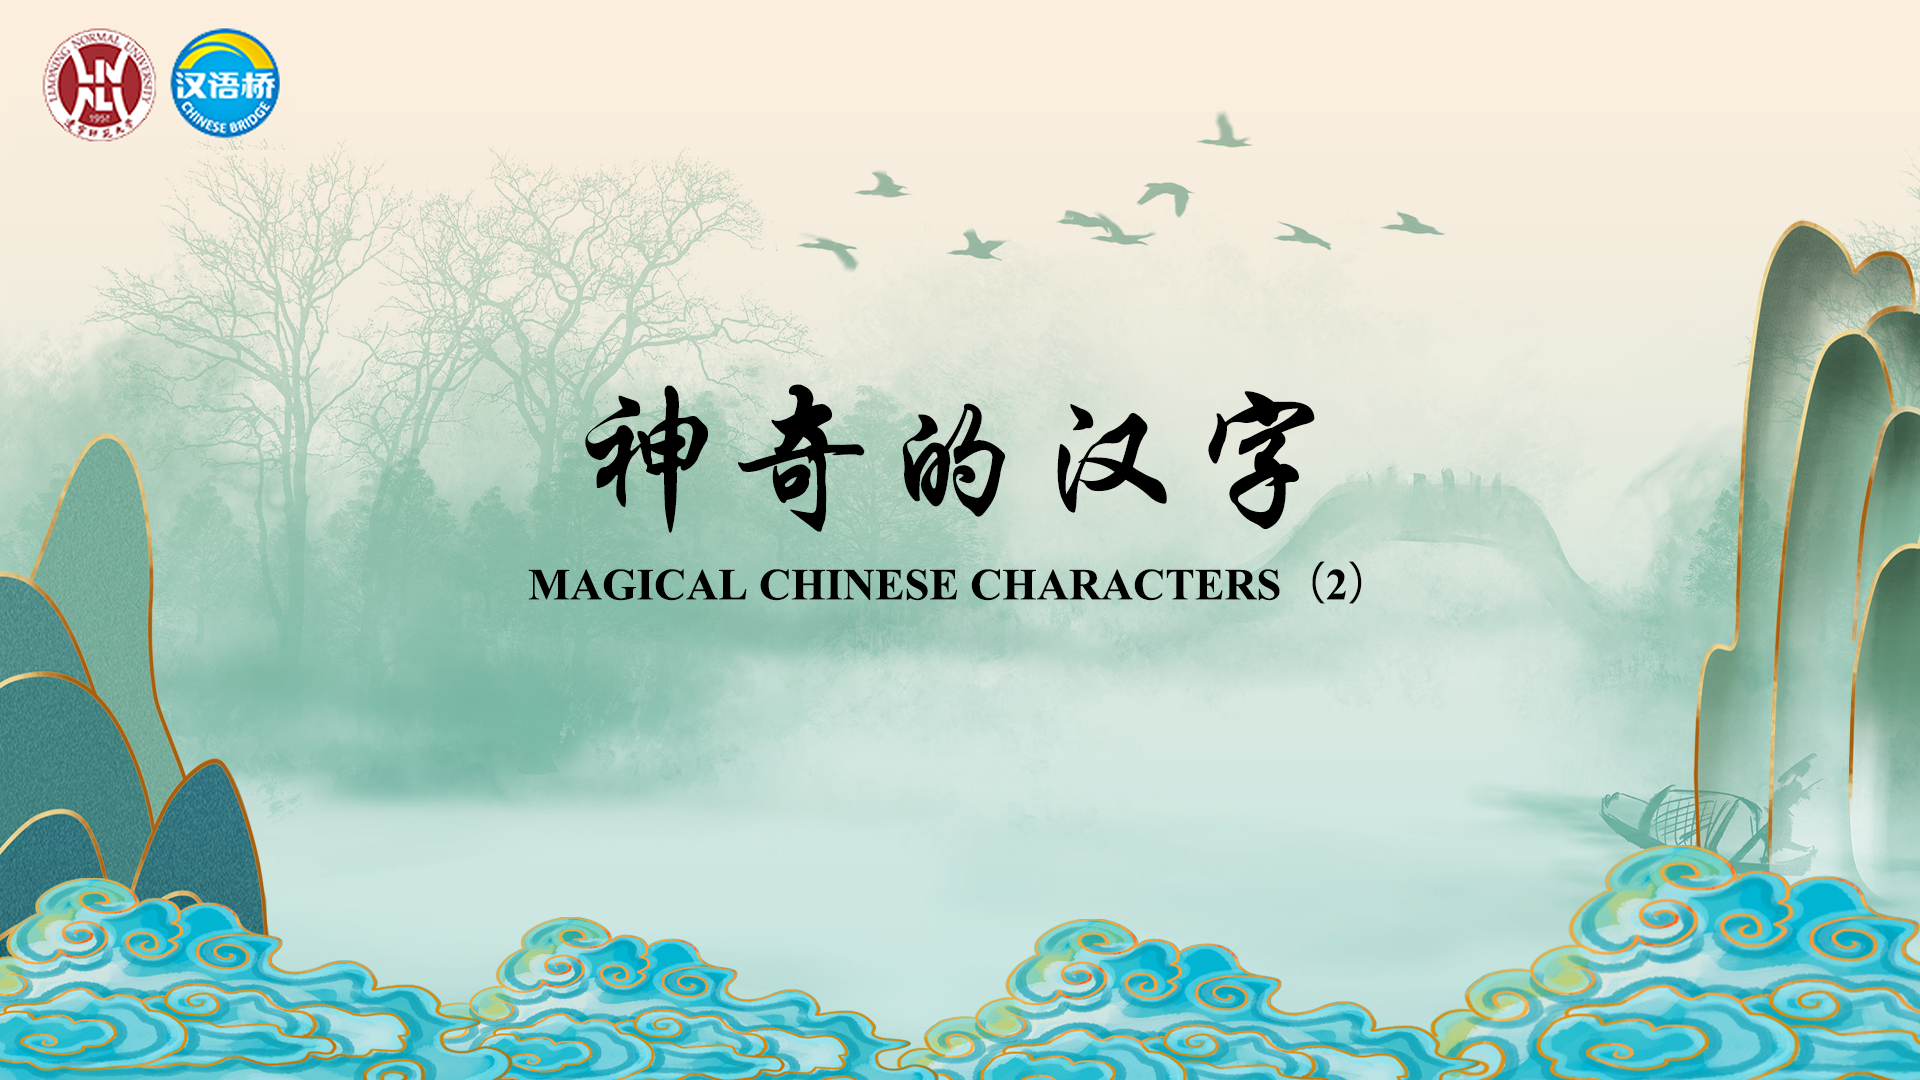 Magical Chinese Characters（2）